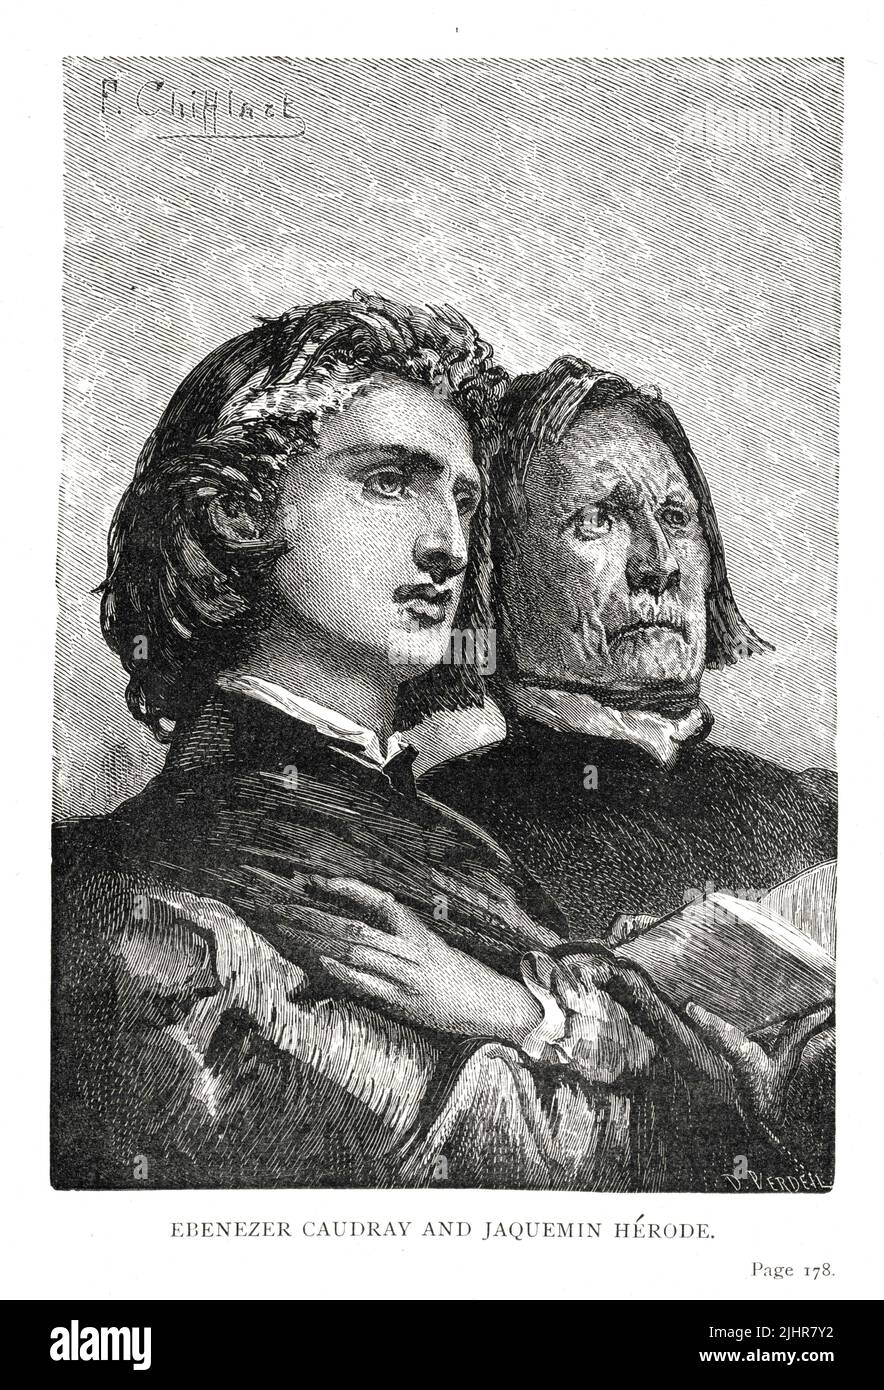 Portraits of Reverend Joë Ebenezer Caudray and Jacquemin Hérode. First part, Book VII, chapter III.  Illustration from a set of 56 engravings published in the English edition of 'Les Travailleurs de la Mer' ('Toilers of the Sea'), by Victor Hugo, published in 1869 by Sampson Low, Son and Marston.  Illustrator: François-Nicolas Chifflart. Engraver: D. Verdeil Stock Photo